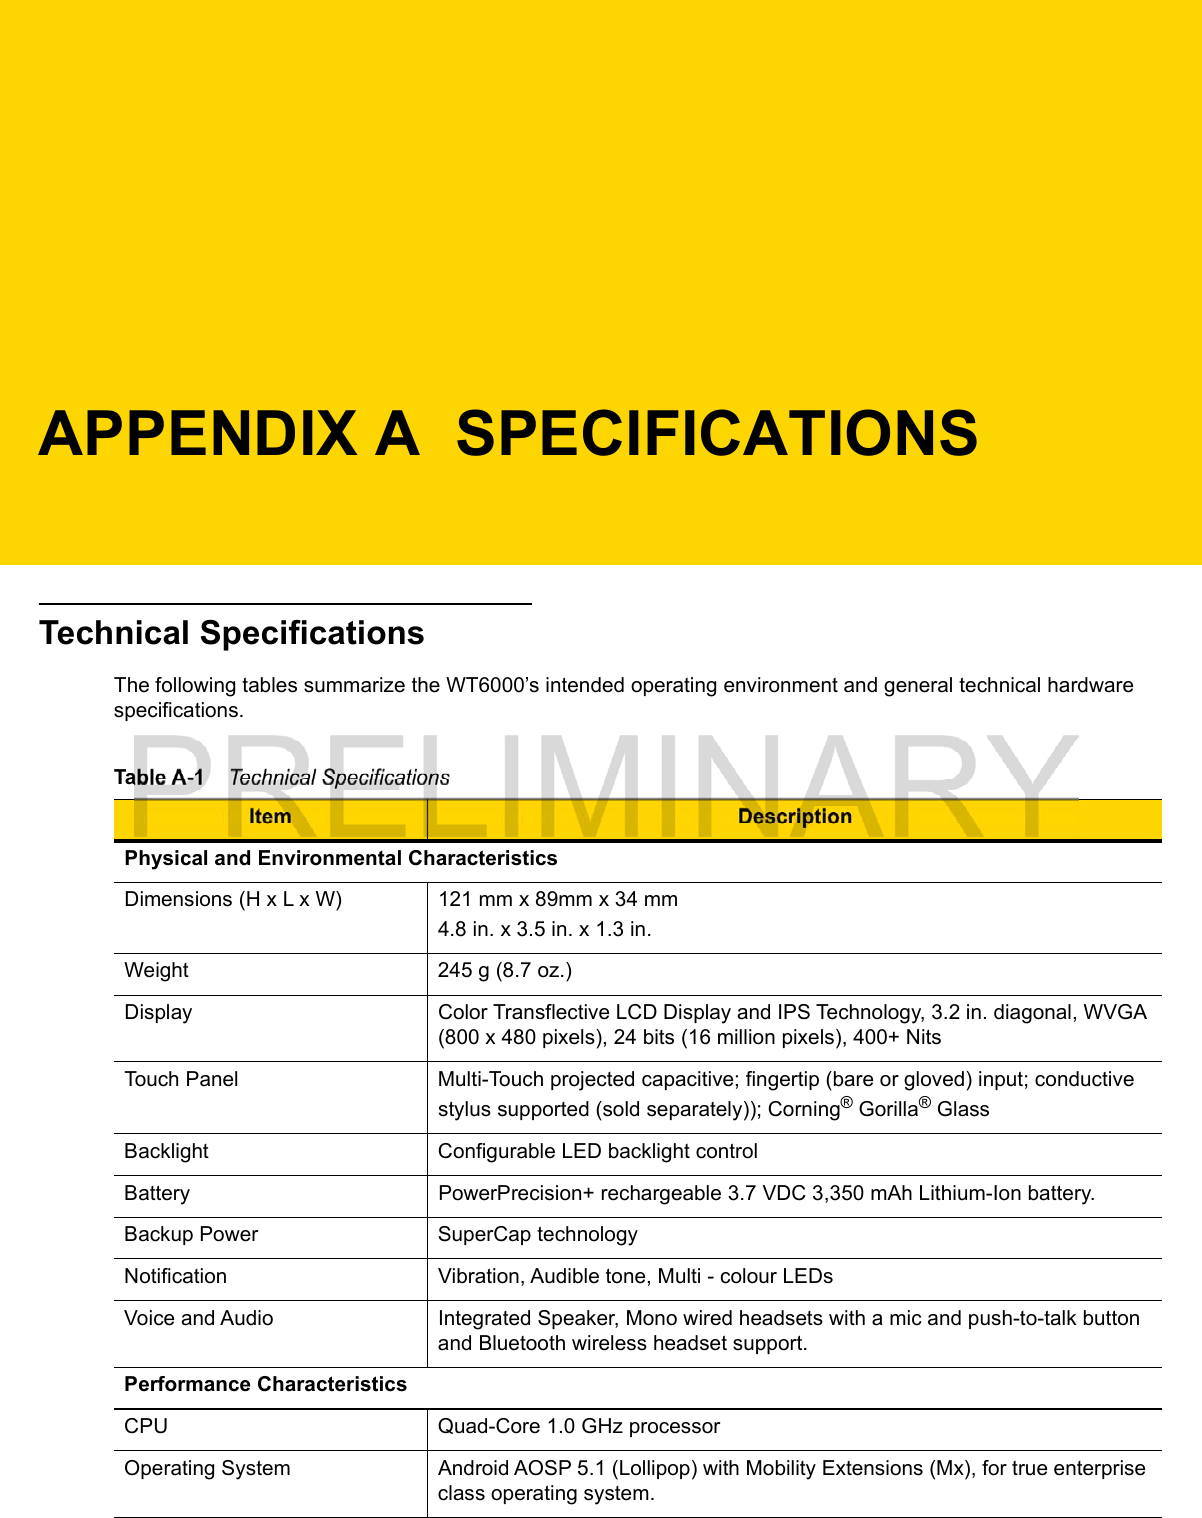 APPENDIX A  SPECIFICATIONSTechnical SpecificationsThe following tables summarize the WT6000’s intended operating environment and general technical hardware specifications.Table A-1    Technical SpecificationsItem DescriptionPhysical and Environmental CharacteristicsDimensions (H x L x W) 121 mm x 89mm x 34 mm4.8 in. x 3.5 in. x 1.3 in.Weight 245 g (8.7 oz.)Display Color Transflective LCD Display and IPS Technology, 3.2 in. diagonal, WVGA (800 x 480 pixels), 24 bits (16 million pixels), 400+ NitsTouch Panel Multi-Touch projected capacitive; fingertip (bare or gloved) input; conductive stylus supported (sold separately)); Corning® Gorilla® GlassBacklight Configurable LED backlight controlBattery PowerPrecision+ rechargeable 3.7 VDC 3,350 mAh Lithium-Ion battery.Backup Power SuperCap technologyNotification Vibration, Audible tone, Multi - colour LEDsVoice and Audio Integrated Speaker, Mono wired headsets with a mic and push-to-talk button and Bluetooth wireless headset support.Performance CharacteristicsCPU Quad-Core 1.0 GHz processorOperating System Android AOSP 5.1 (Lollipop) with Mobility Extensions (Mx), for true enterprise class operating system.